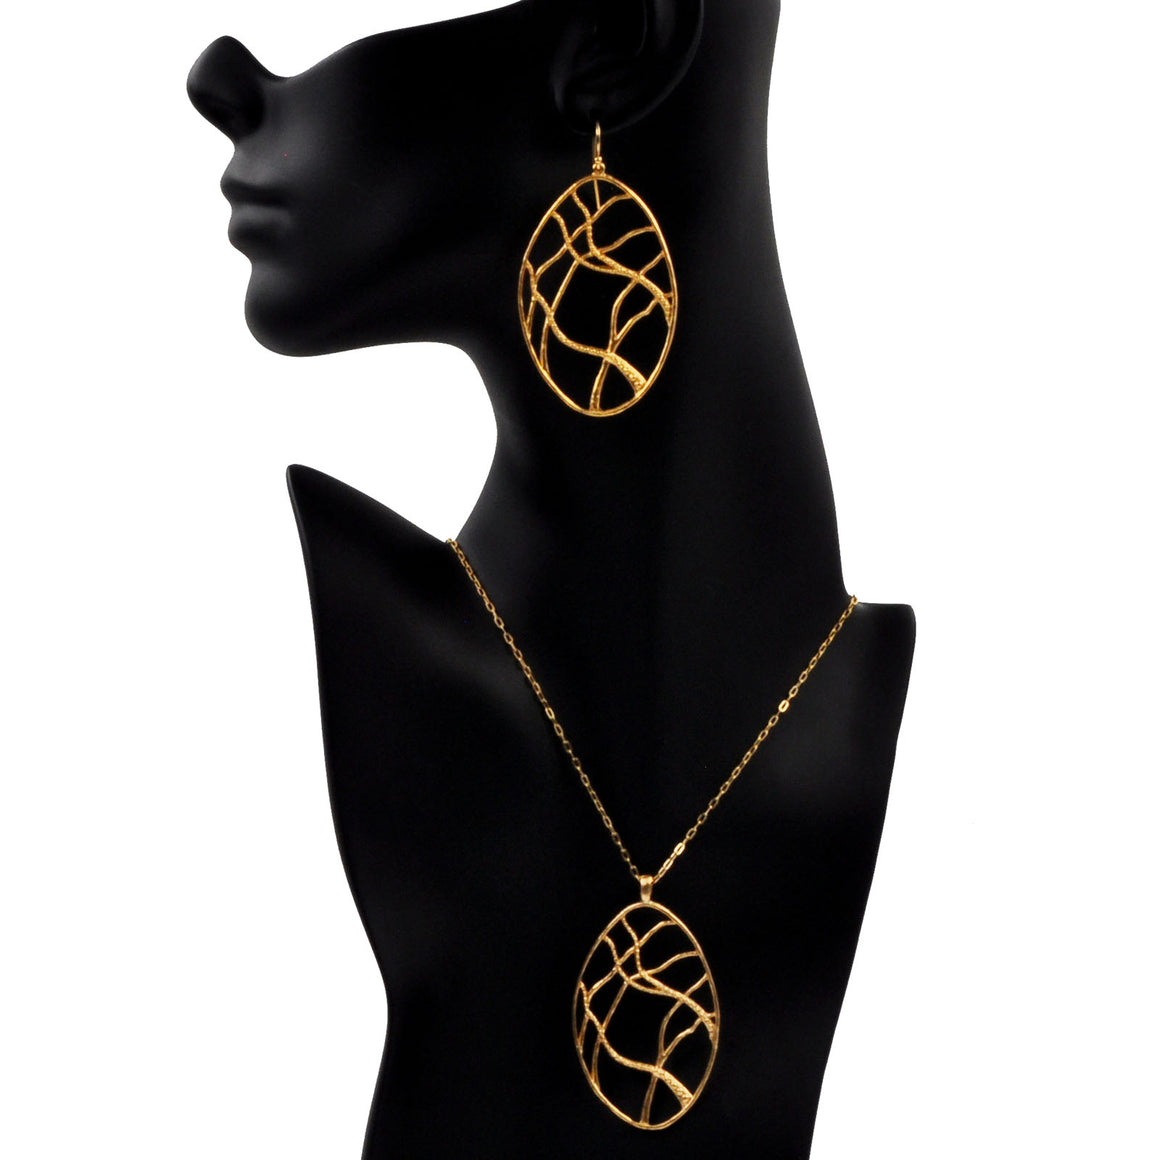 Intricate Branches Oval Necklace - 24K Gold Plated